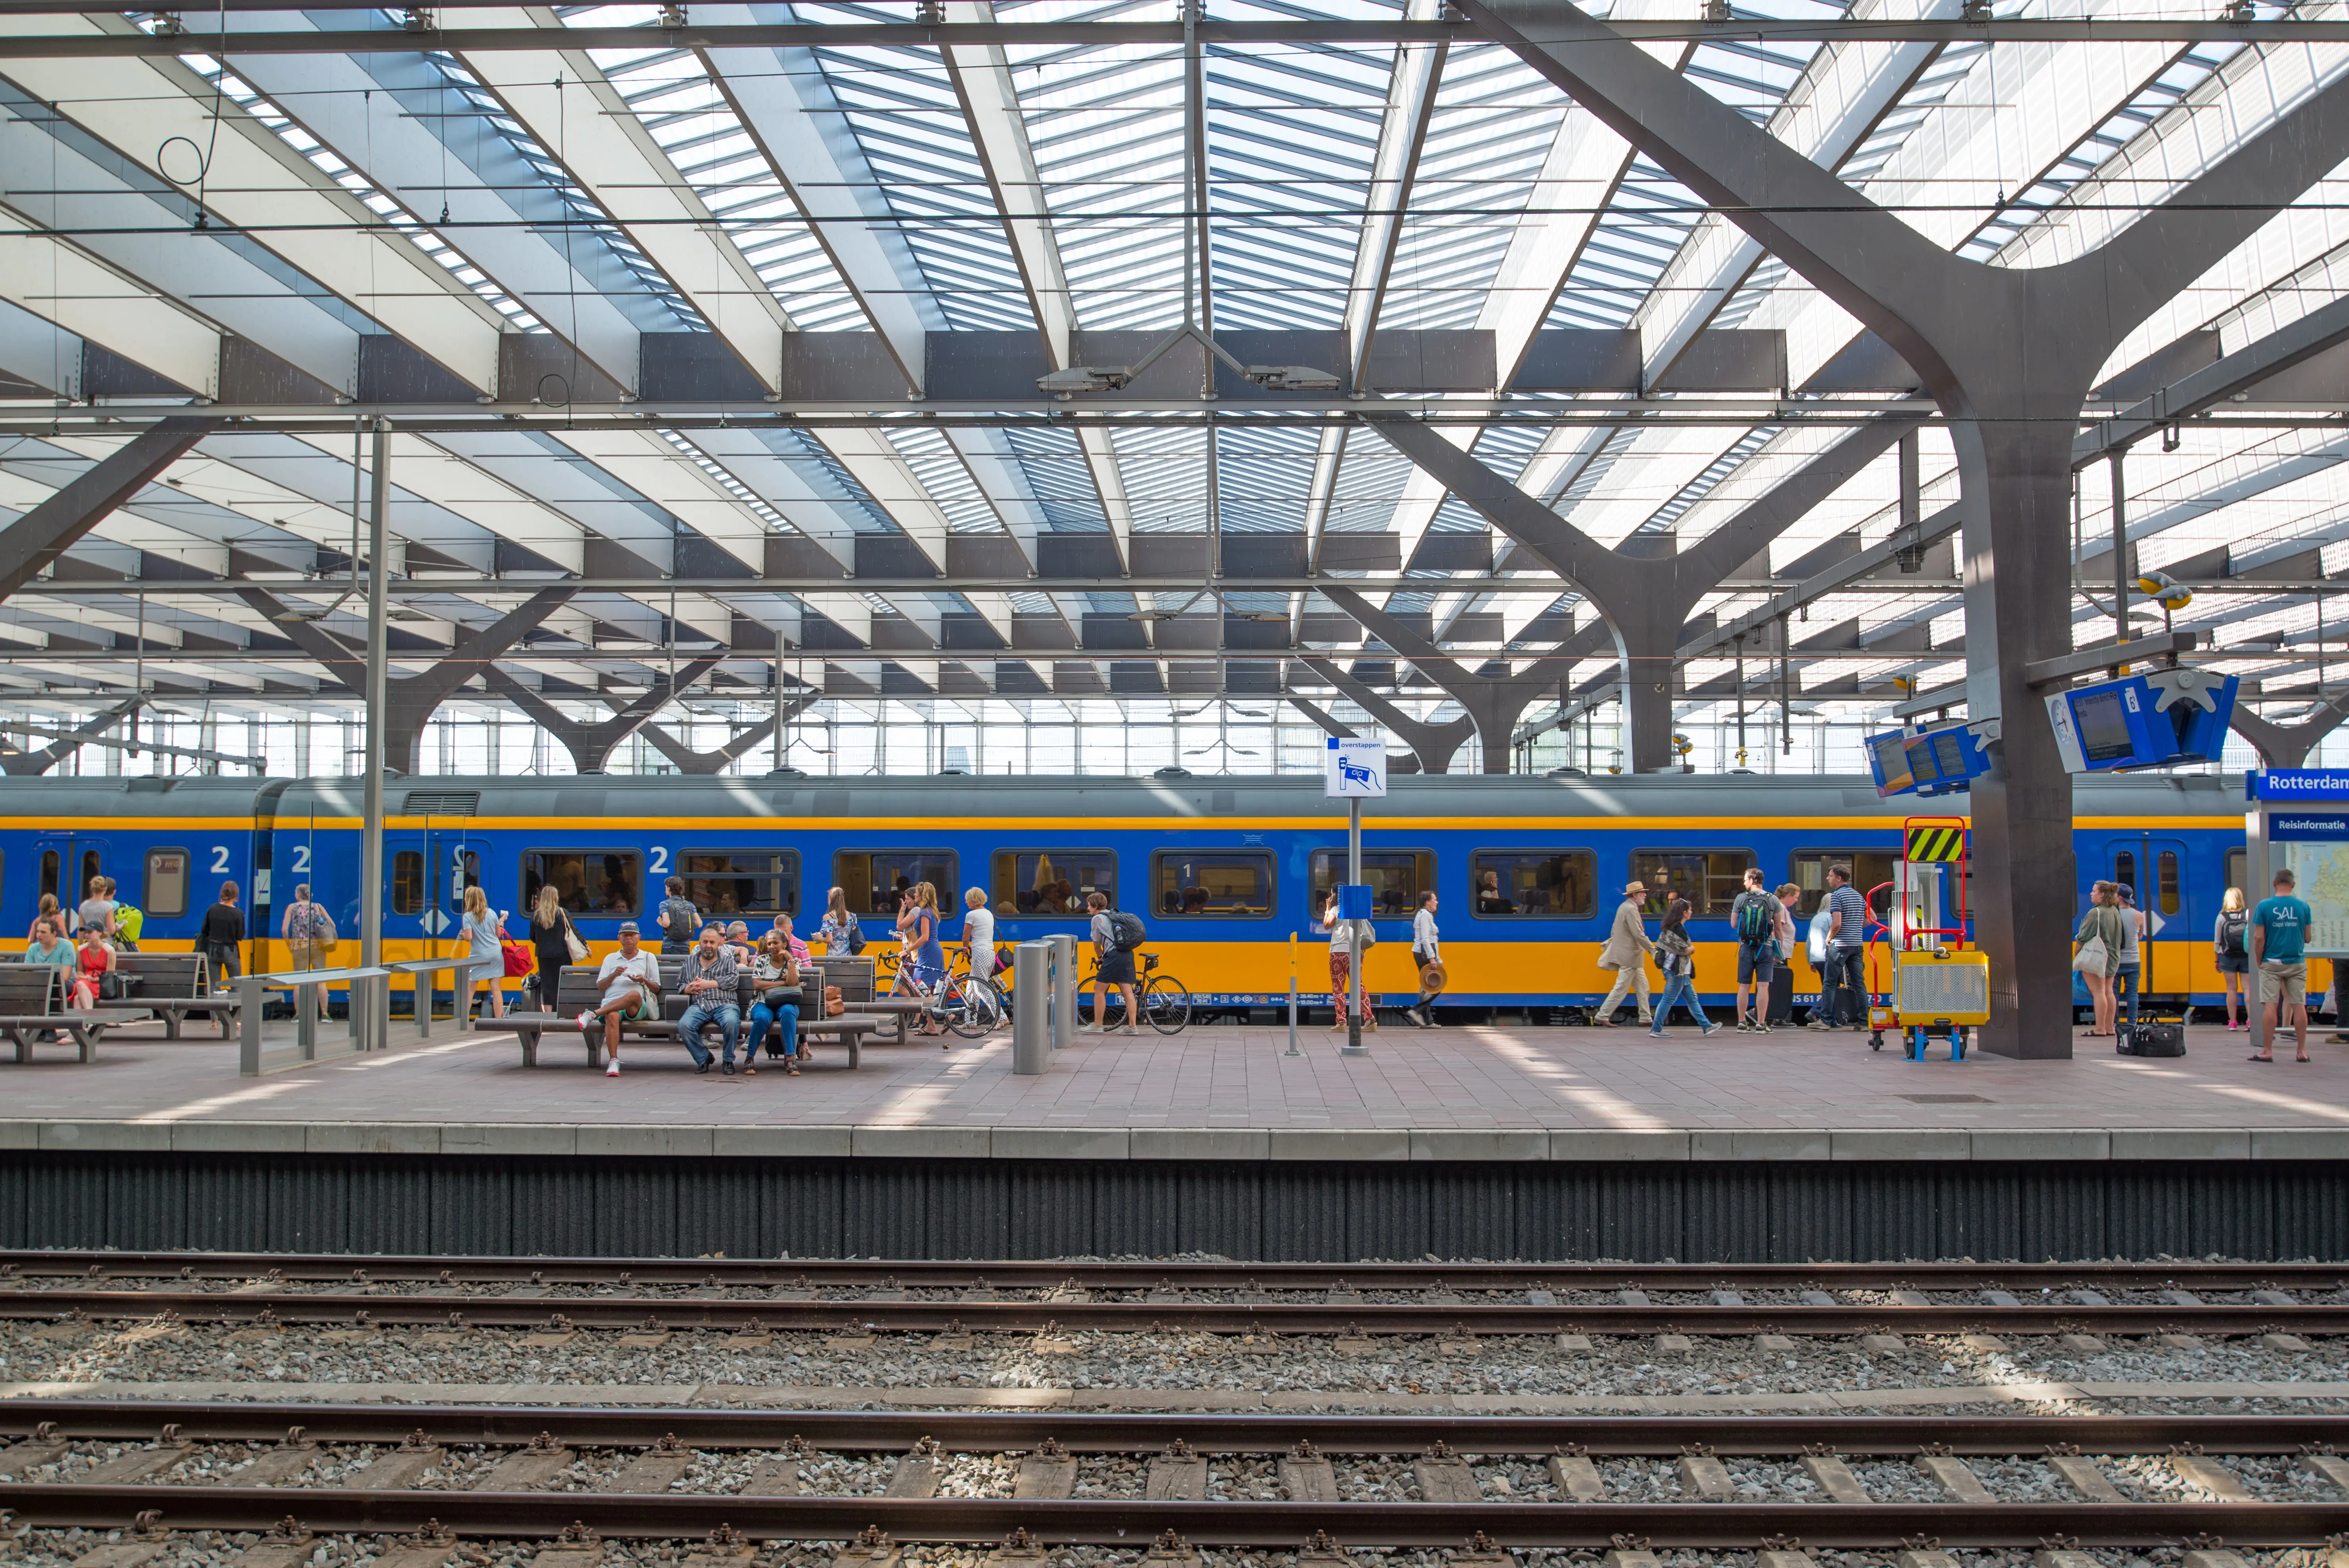 Train arrived at station in the Netherlands